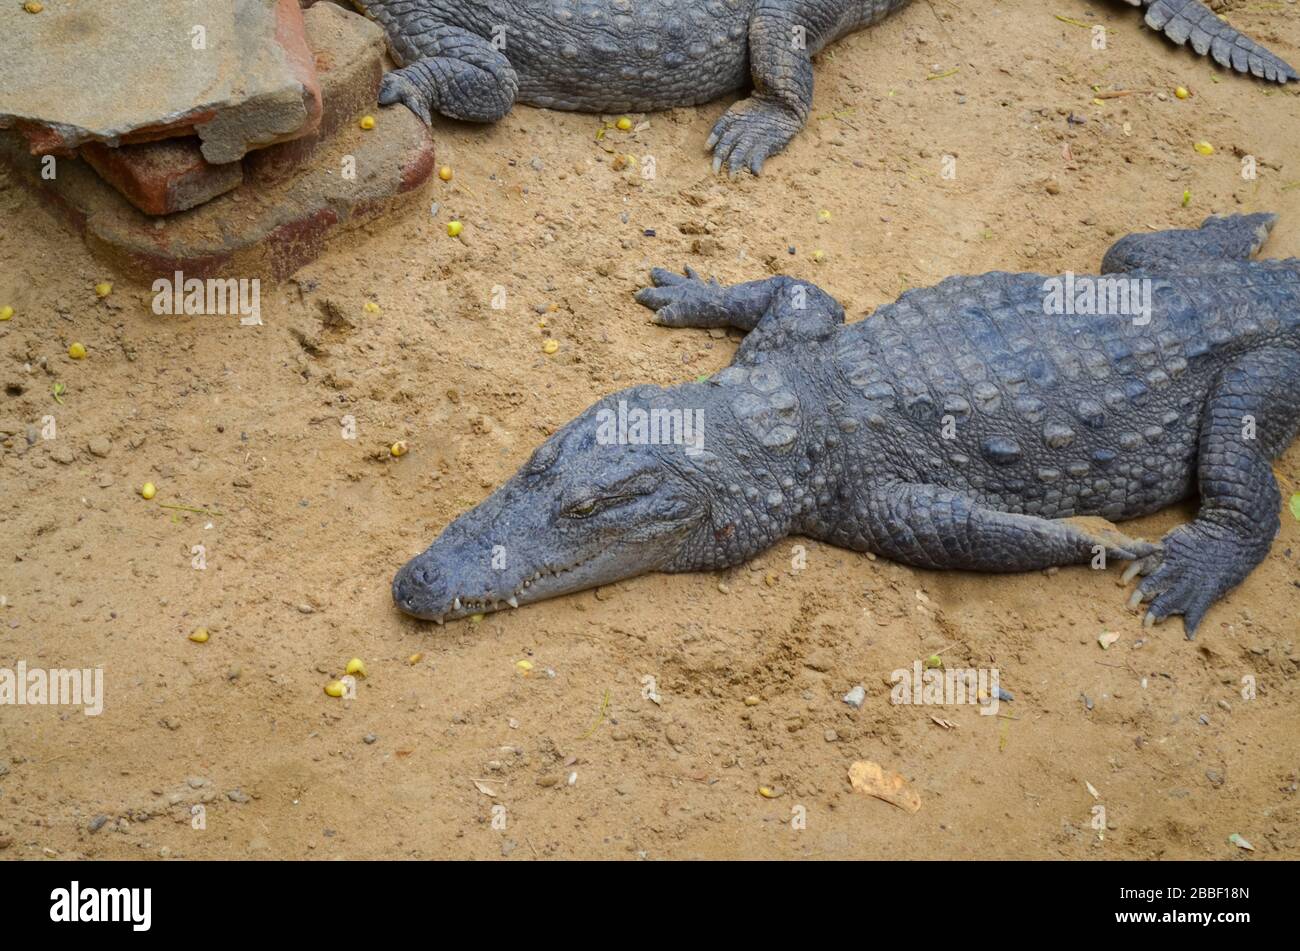 Crocodiles or true crocodiles are large semiaquatic reptiles that live throughout the tropics in Africa, Asia, the Americas and Australia. Stock Photo